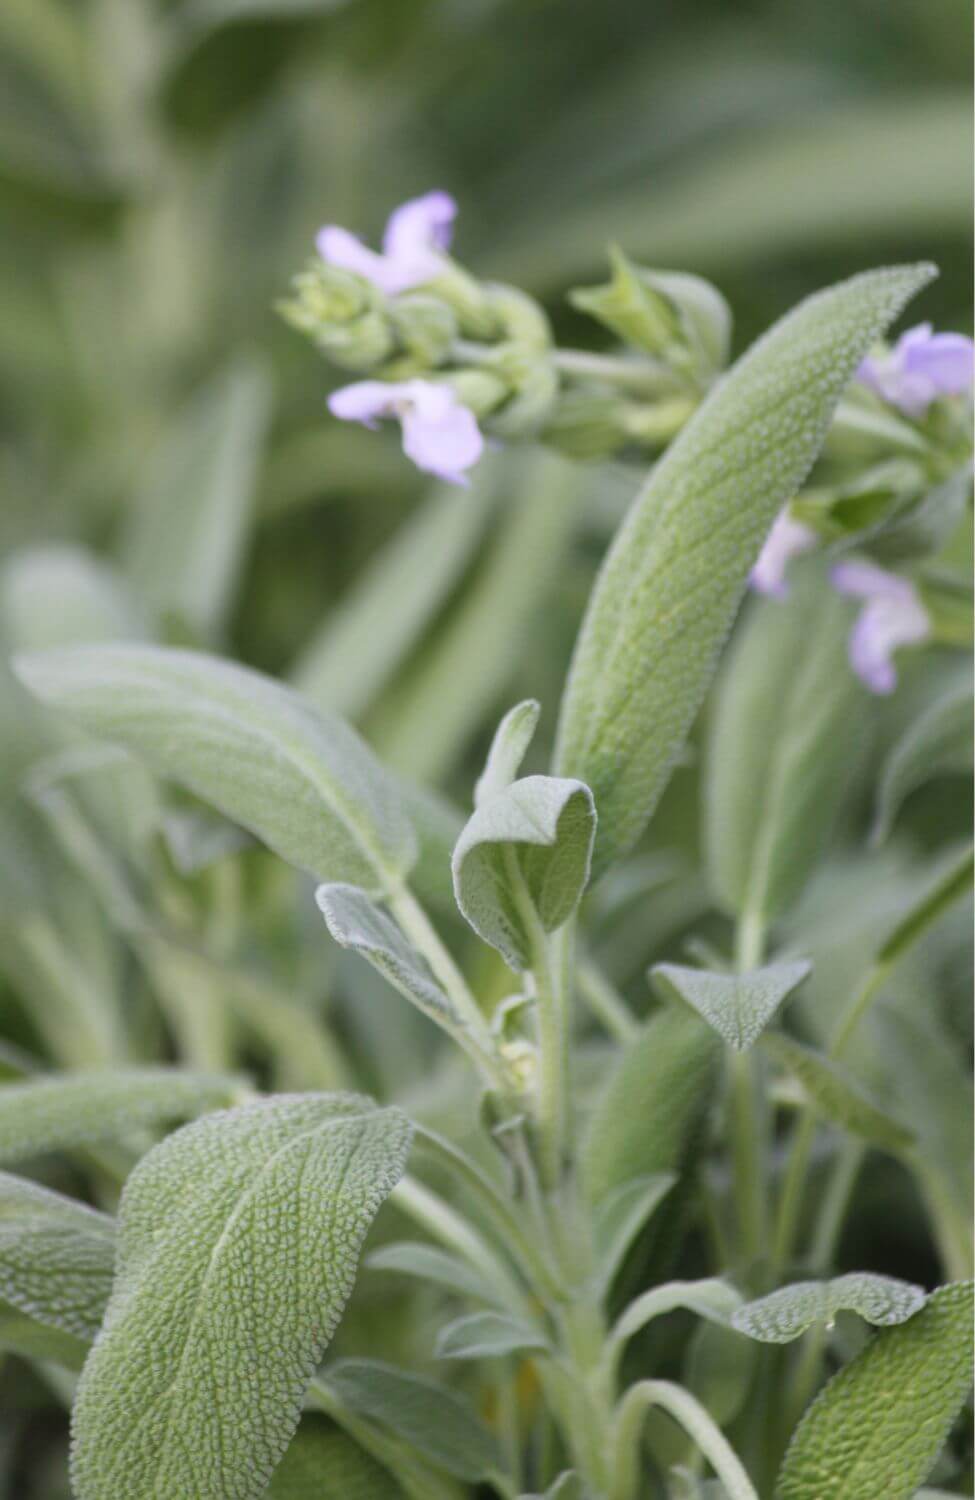 Get Your Green Thumb on with Spanish Sage Seeds - Order Now and Create Your Own Garden Oasis!